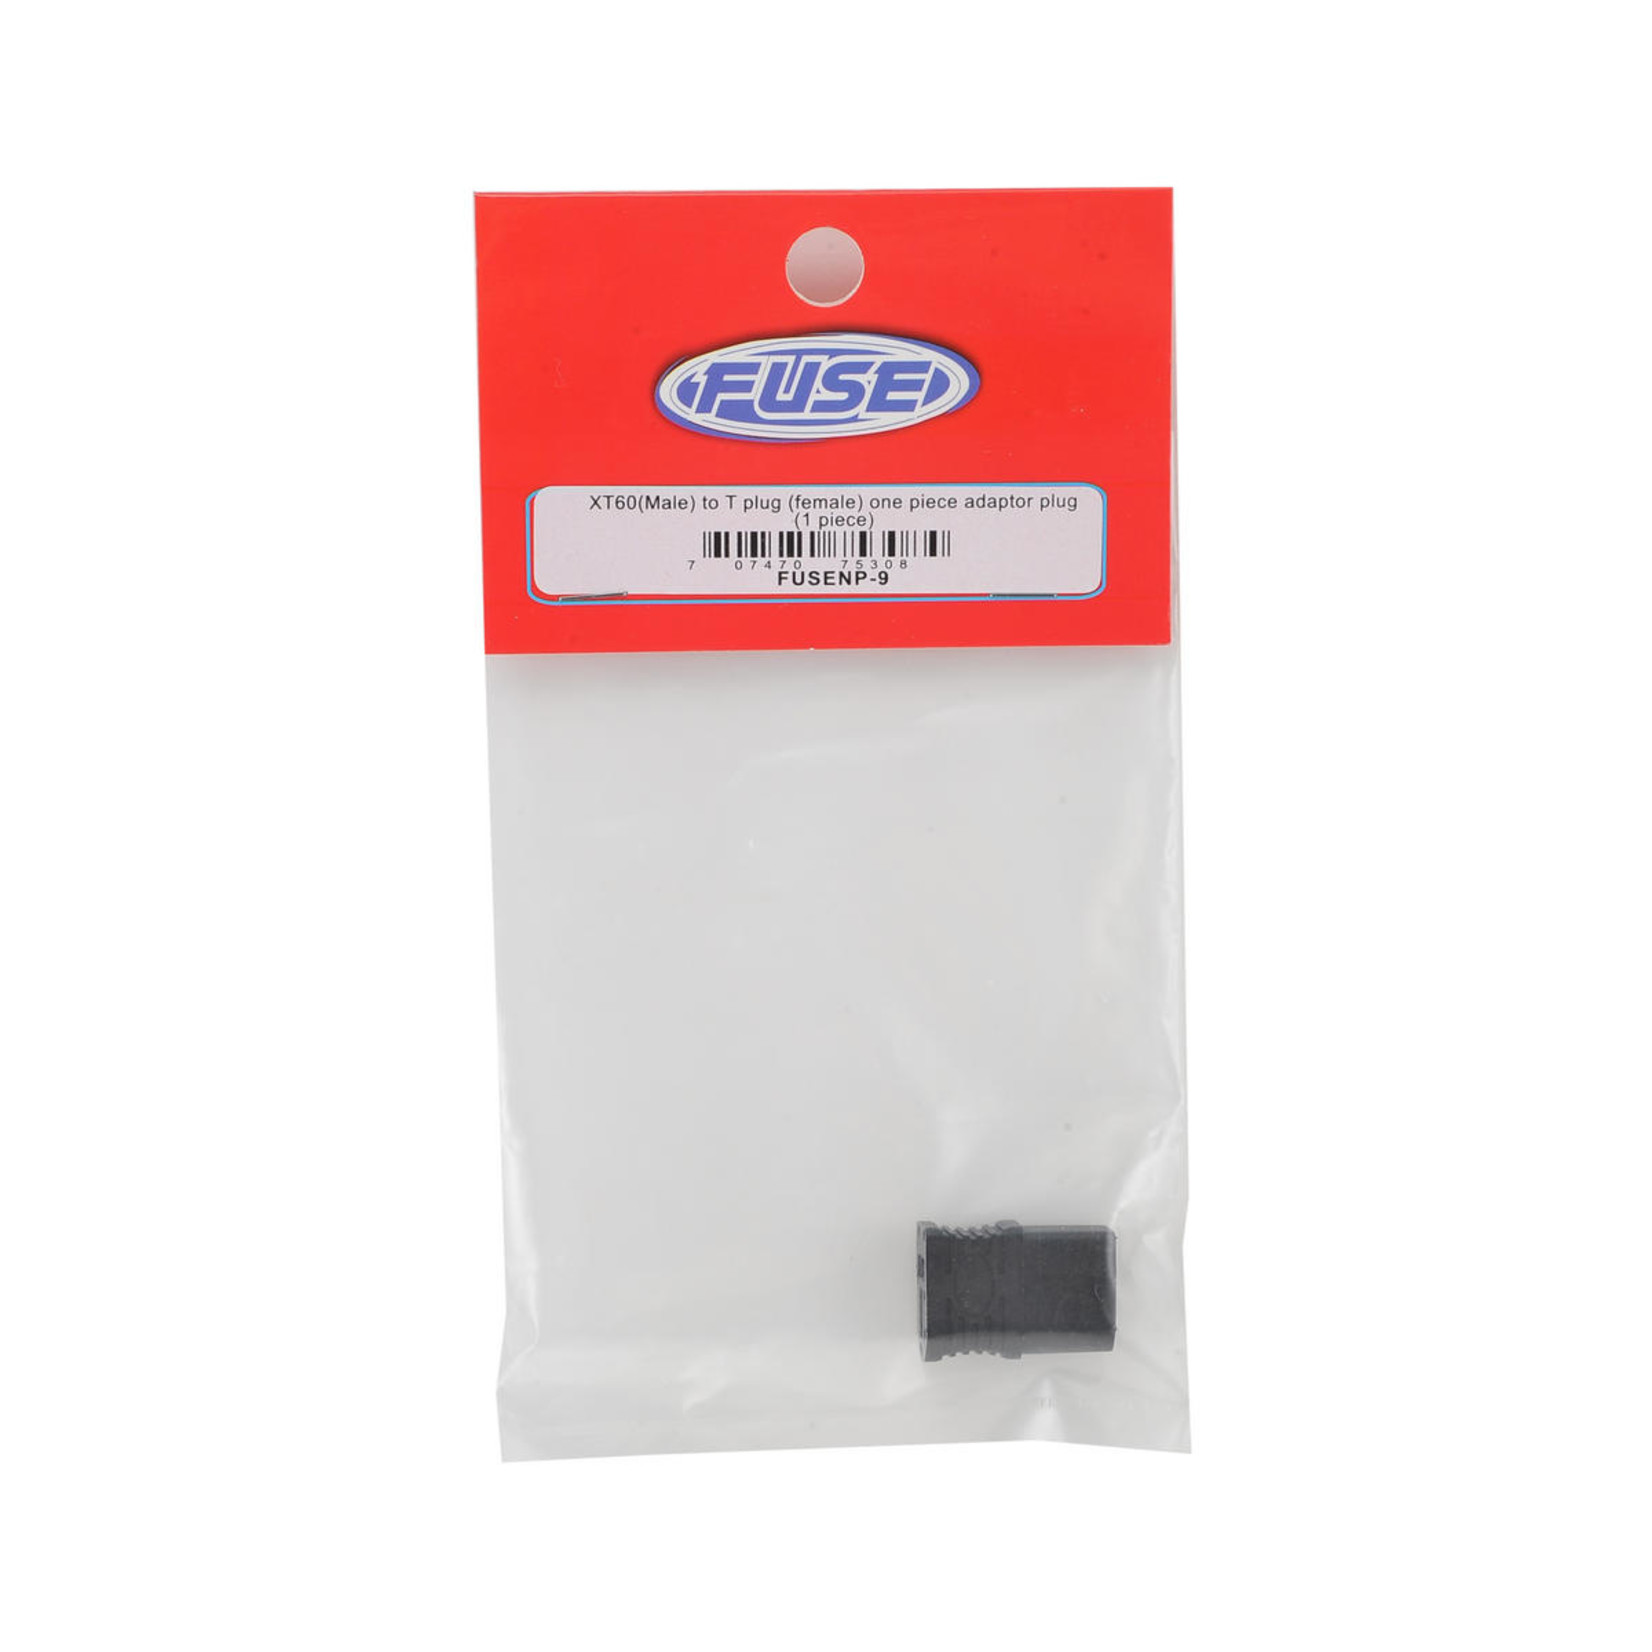 Fuse Battery FUSENP-9 Fuse Battery One Piece Adapter Plug (XT60 Male to T-plug Female)